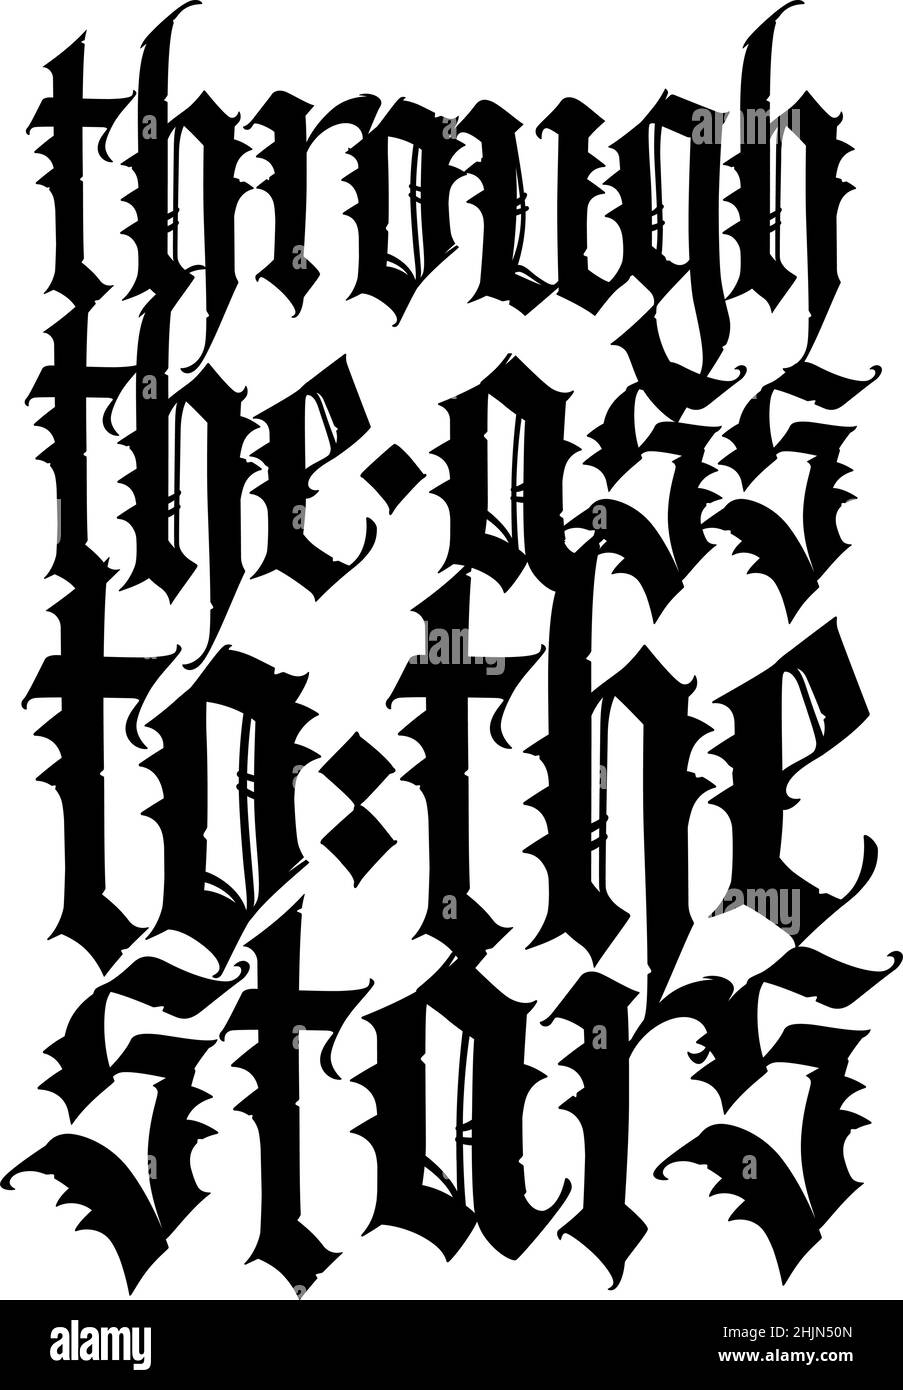 40 Best Blackletter and Gothic Fonts for Designers